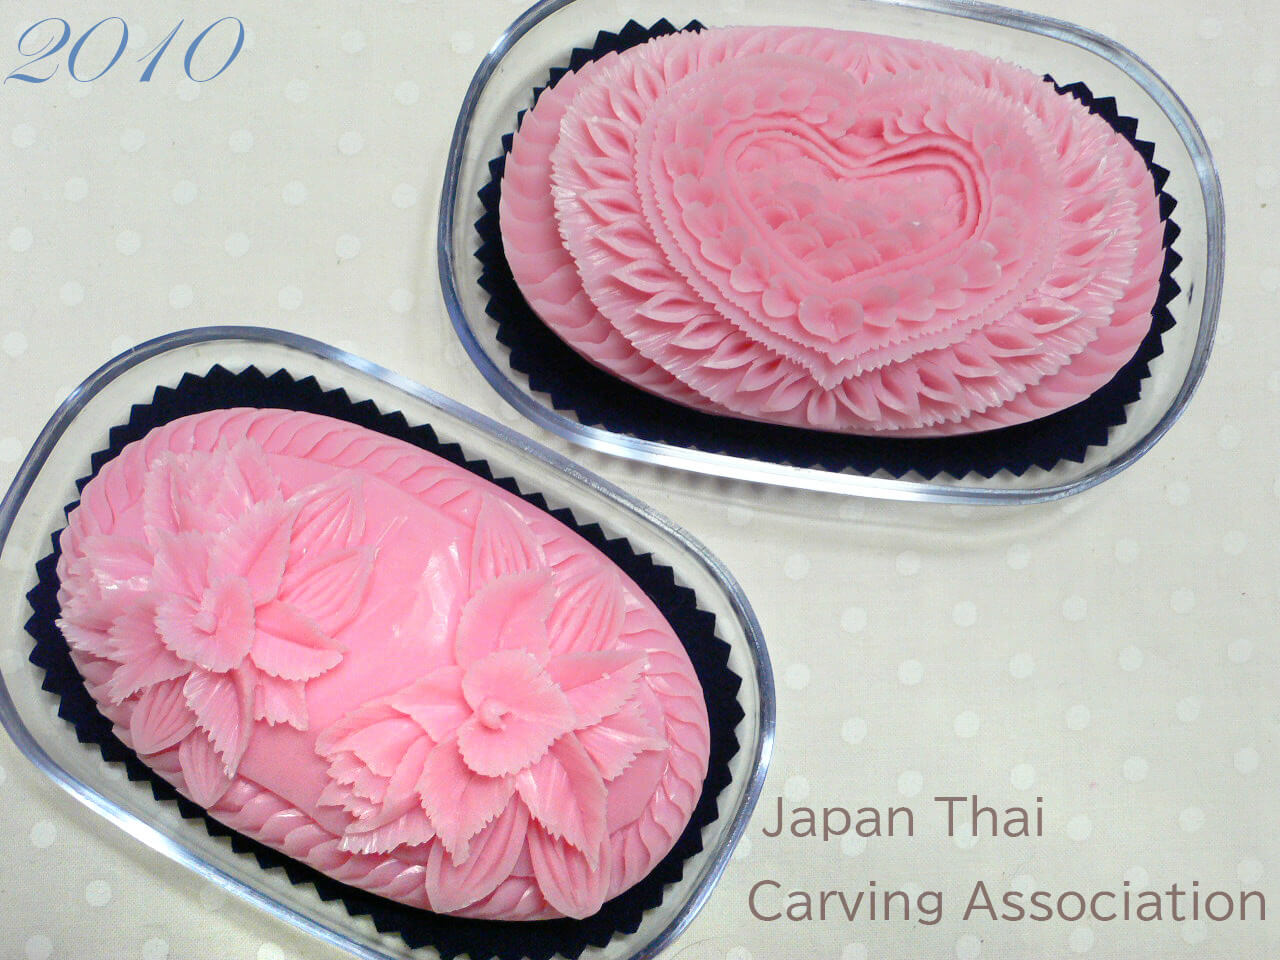 soap carving 2010